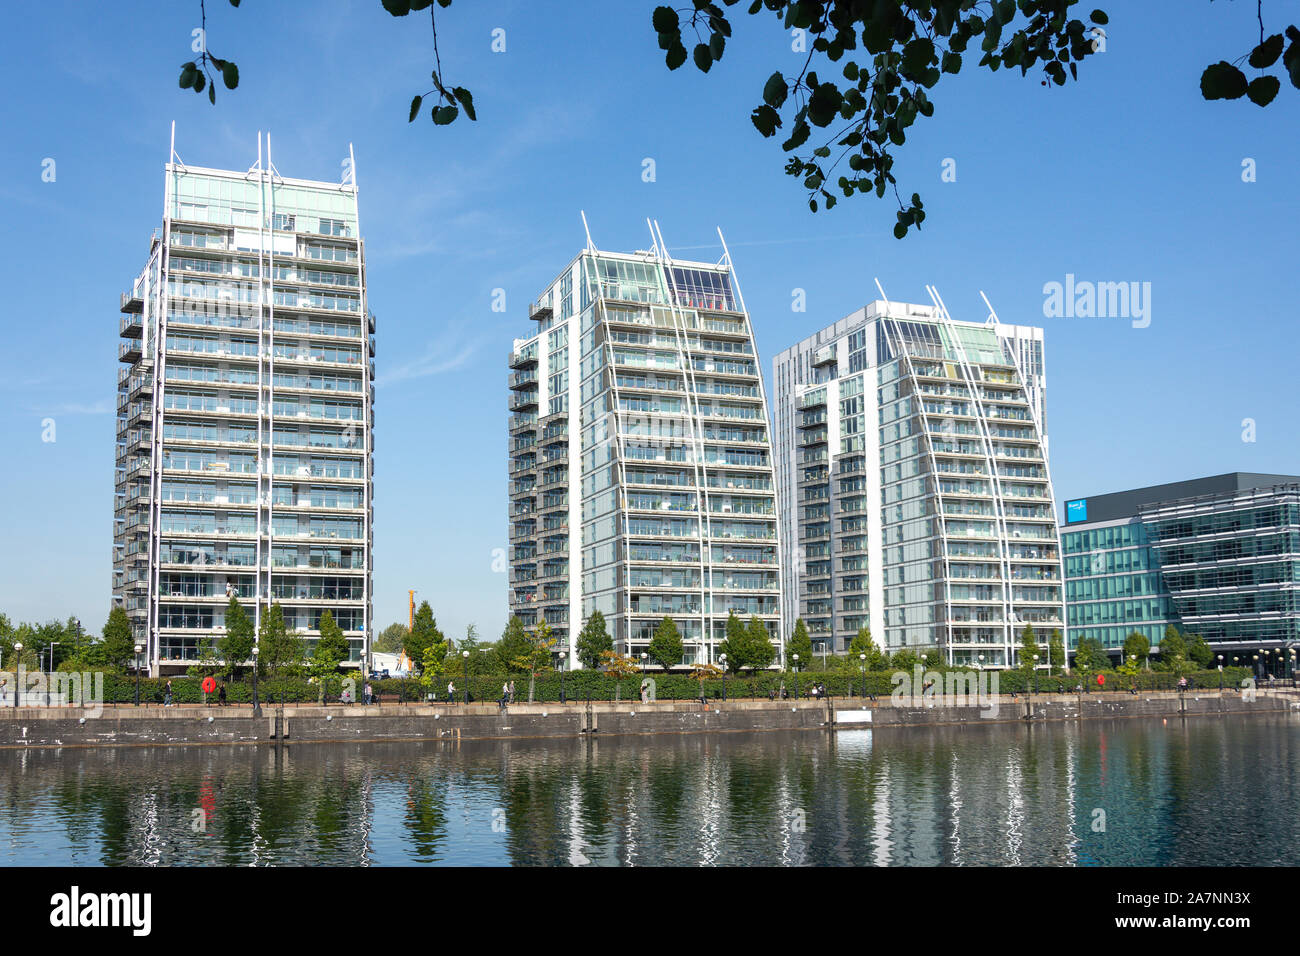 The NV high-rise apartment buildings, Salford Quays, Salford, Manchester, Greater Manchester, England, United Kingdom Stock Photo